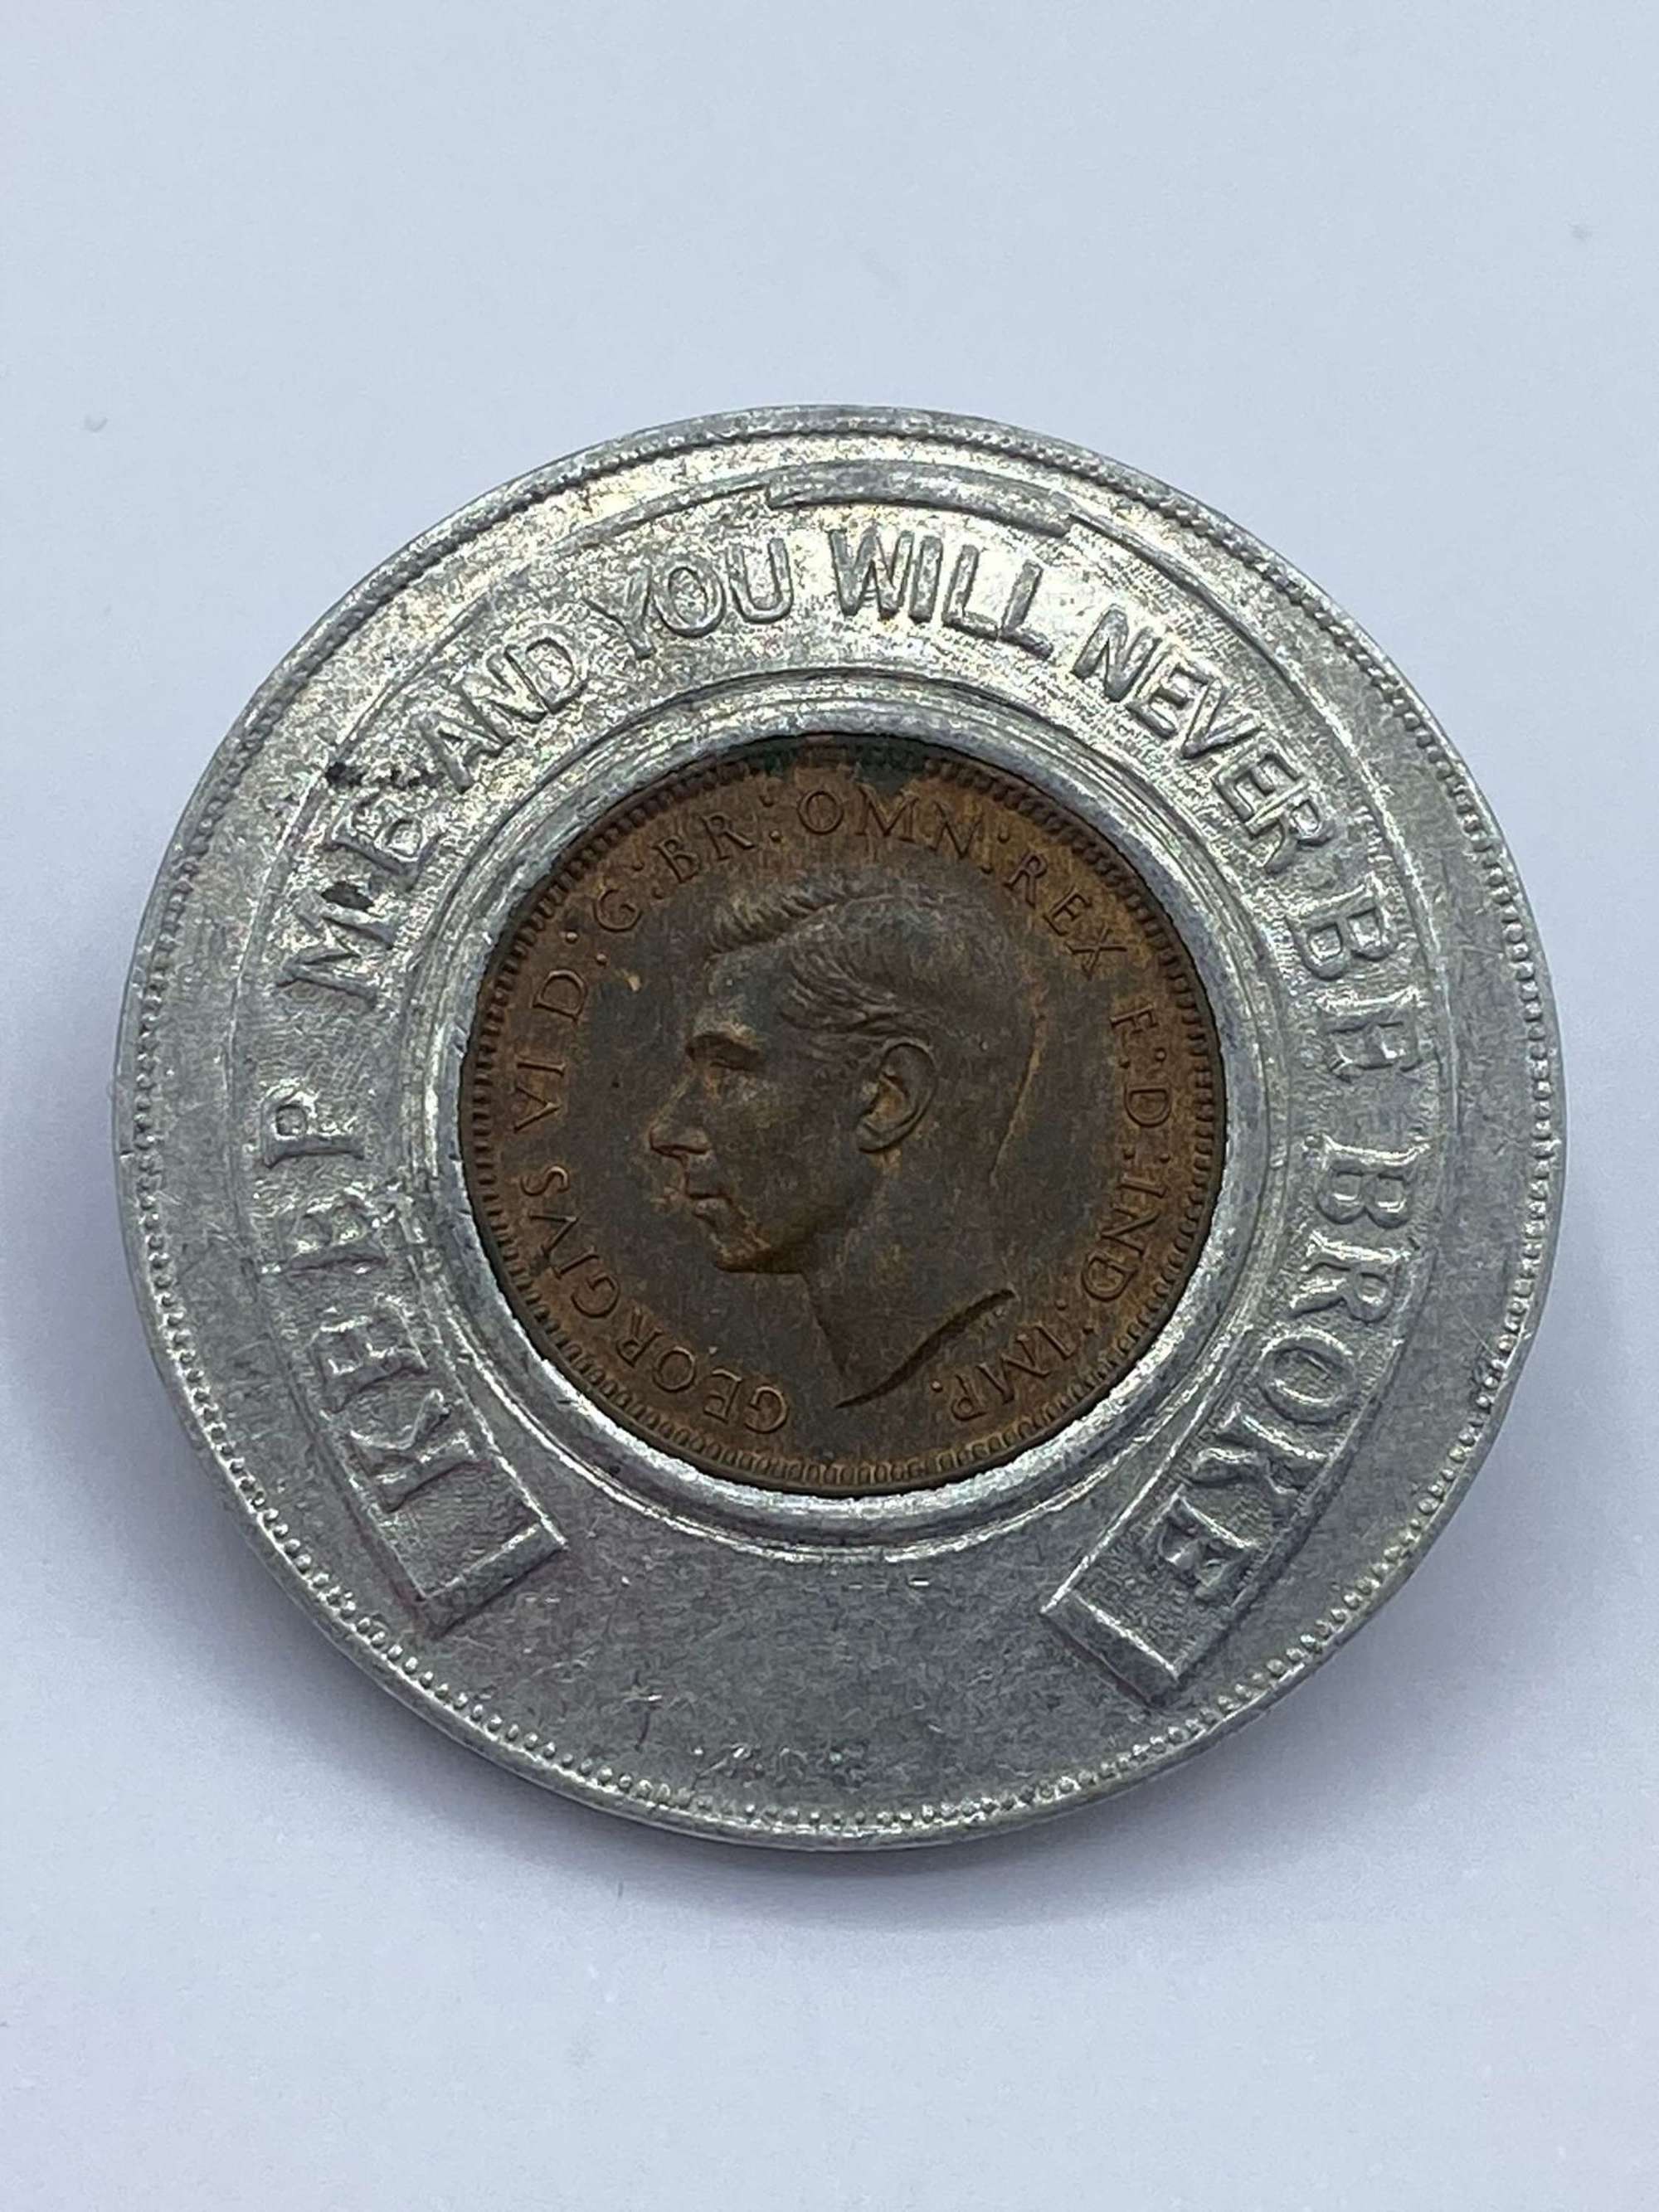 WW2 British “Keep Me And You Will Never Be Broke” 1939 Farthing Token